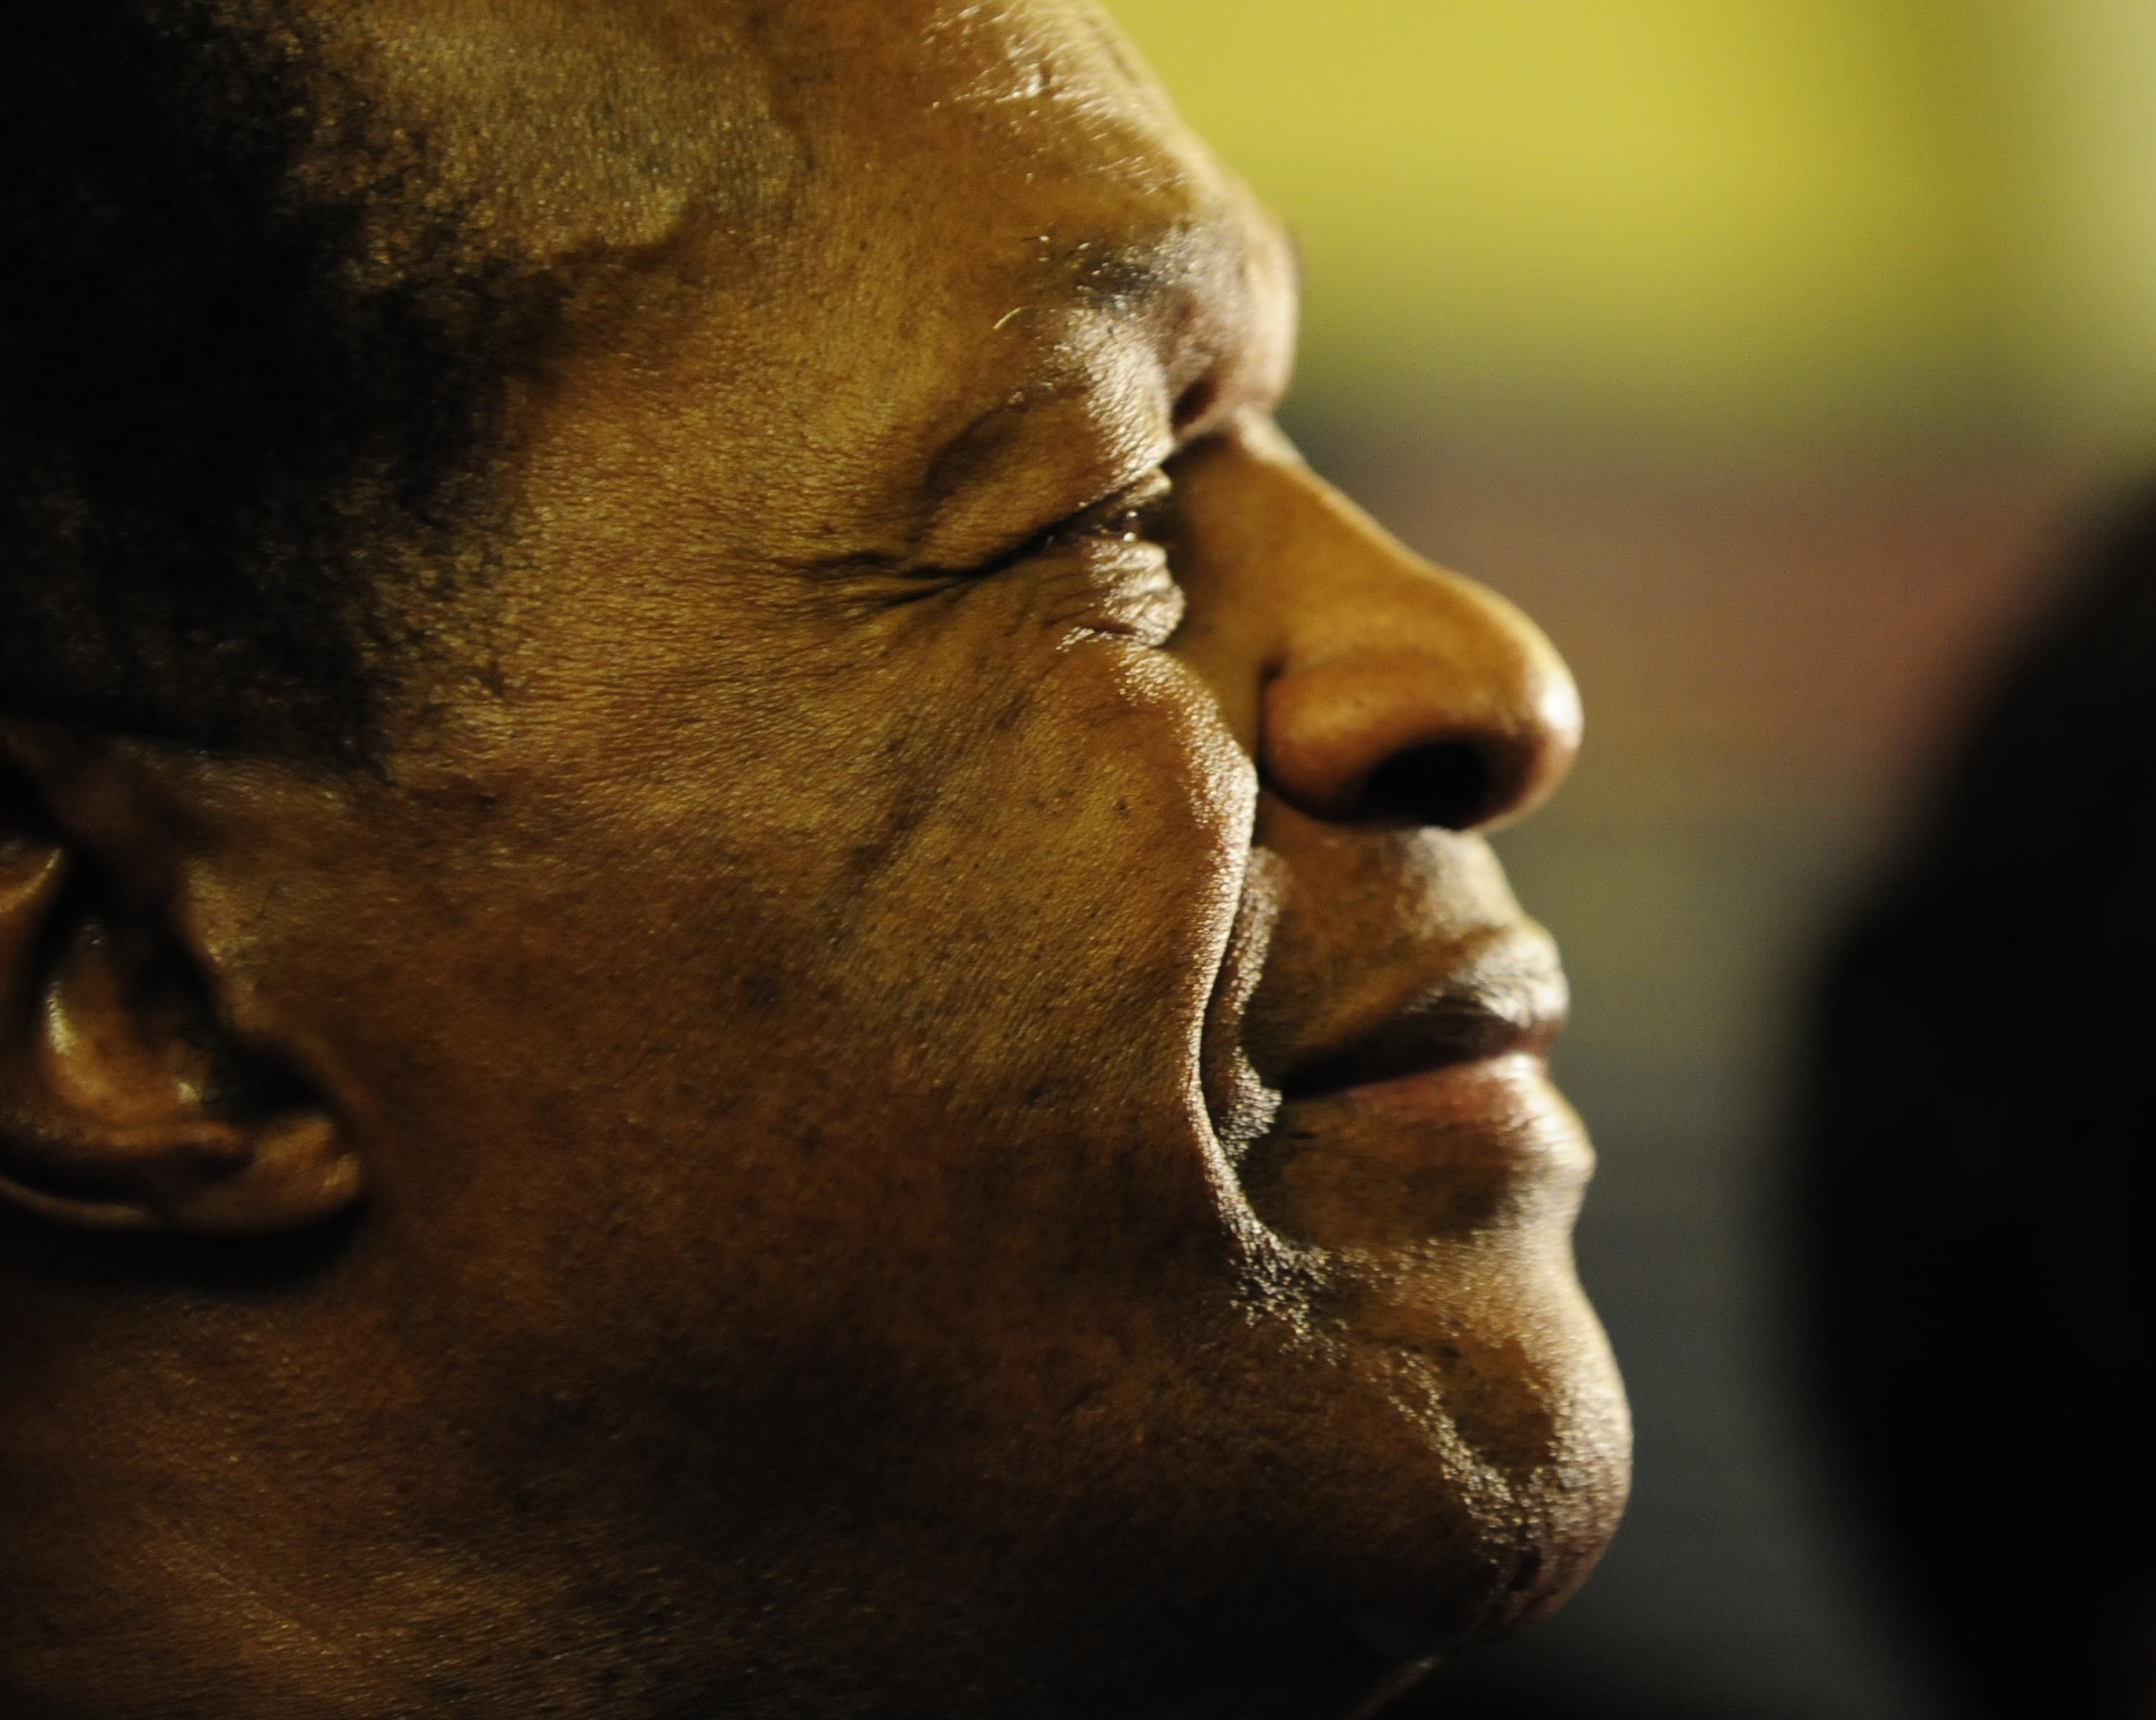 Marion Barry at a DC Council Meeting, March 2, 2010. (Linda Davidson—The Washington Post/Getty Images)